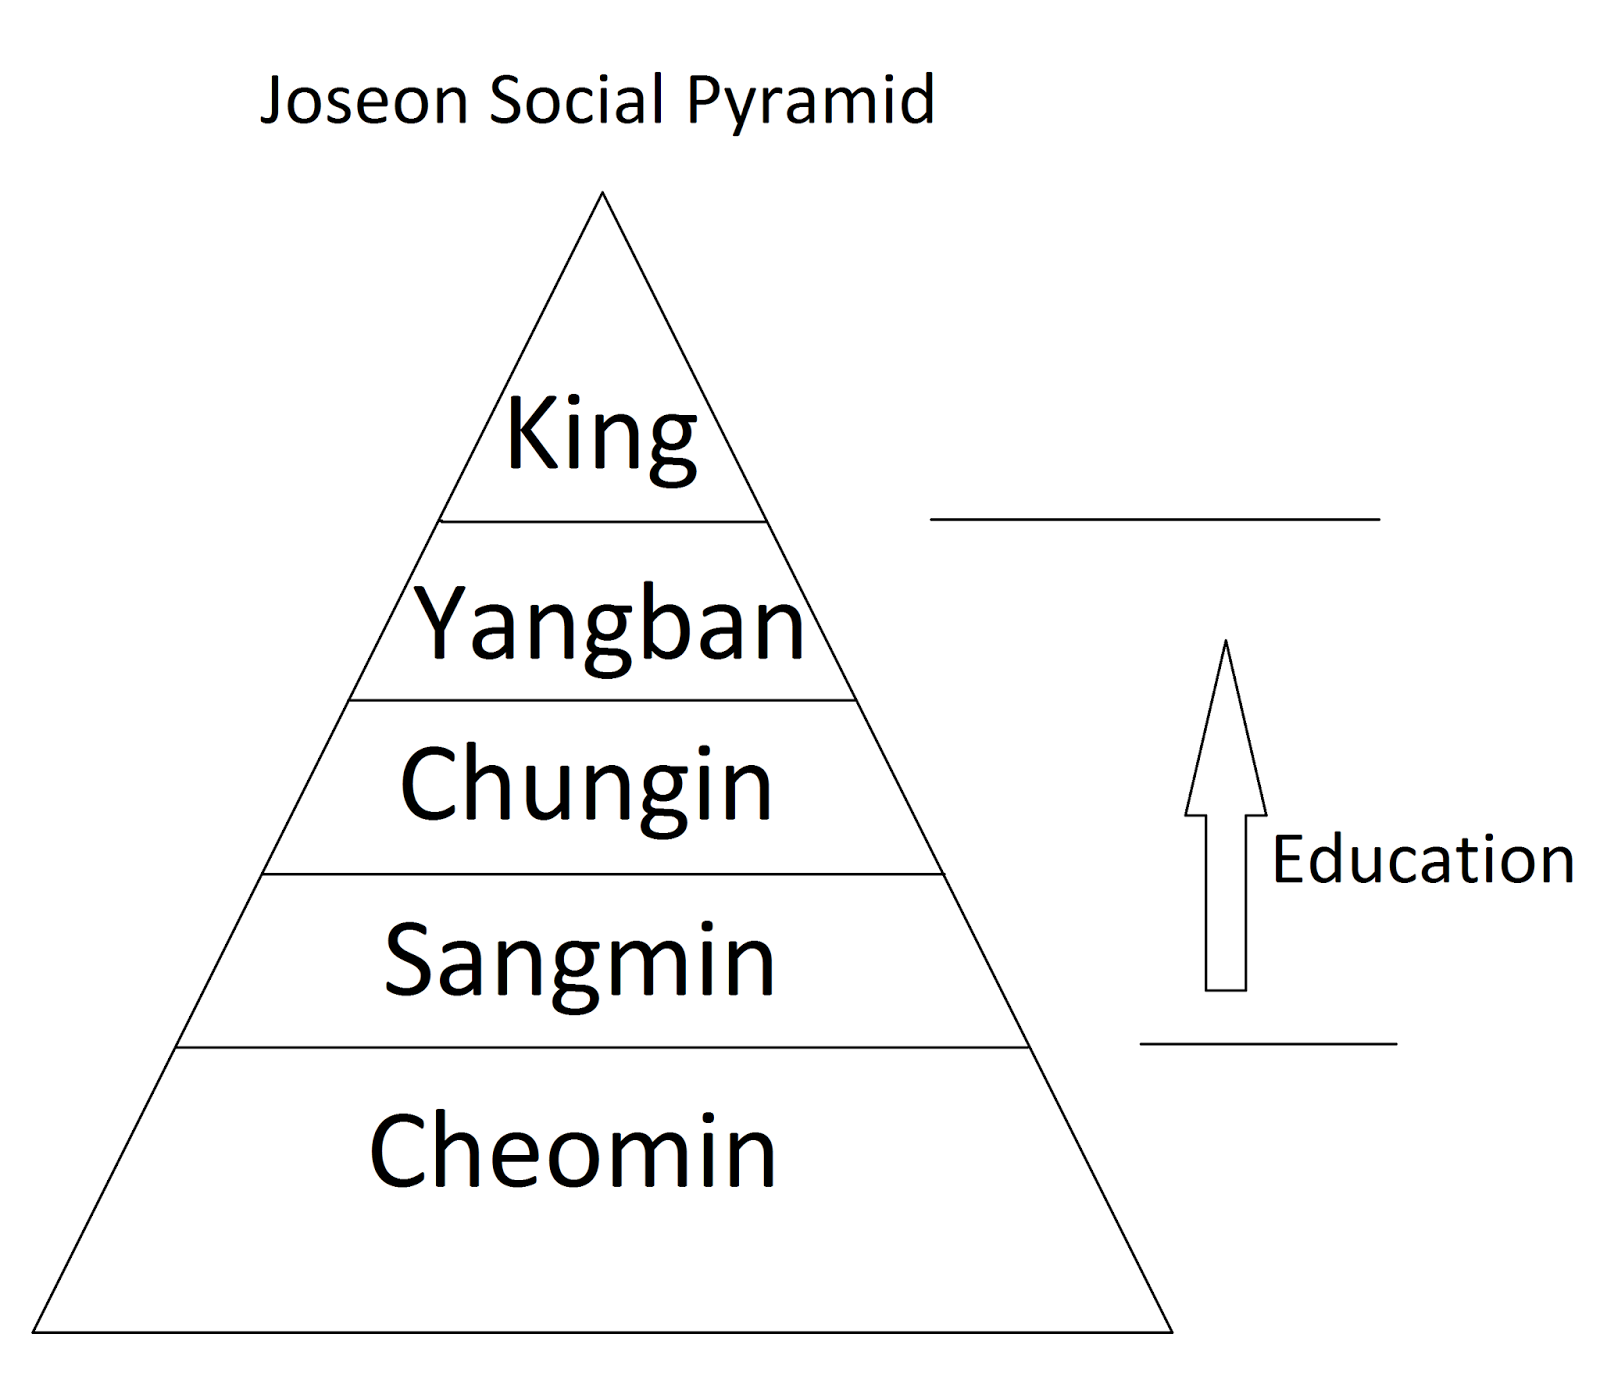 An Anthropological Study of the Joseon Dynasty: Social Structure